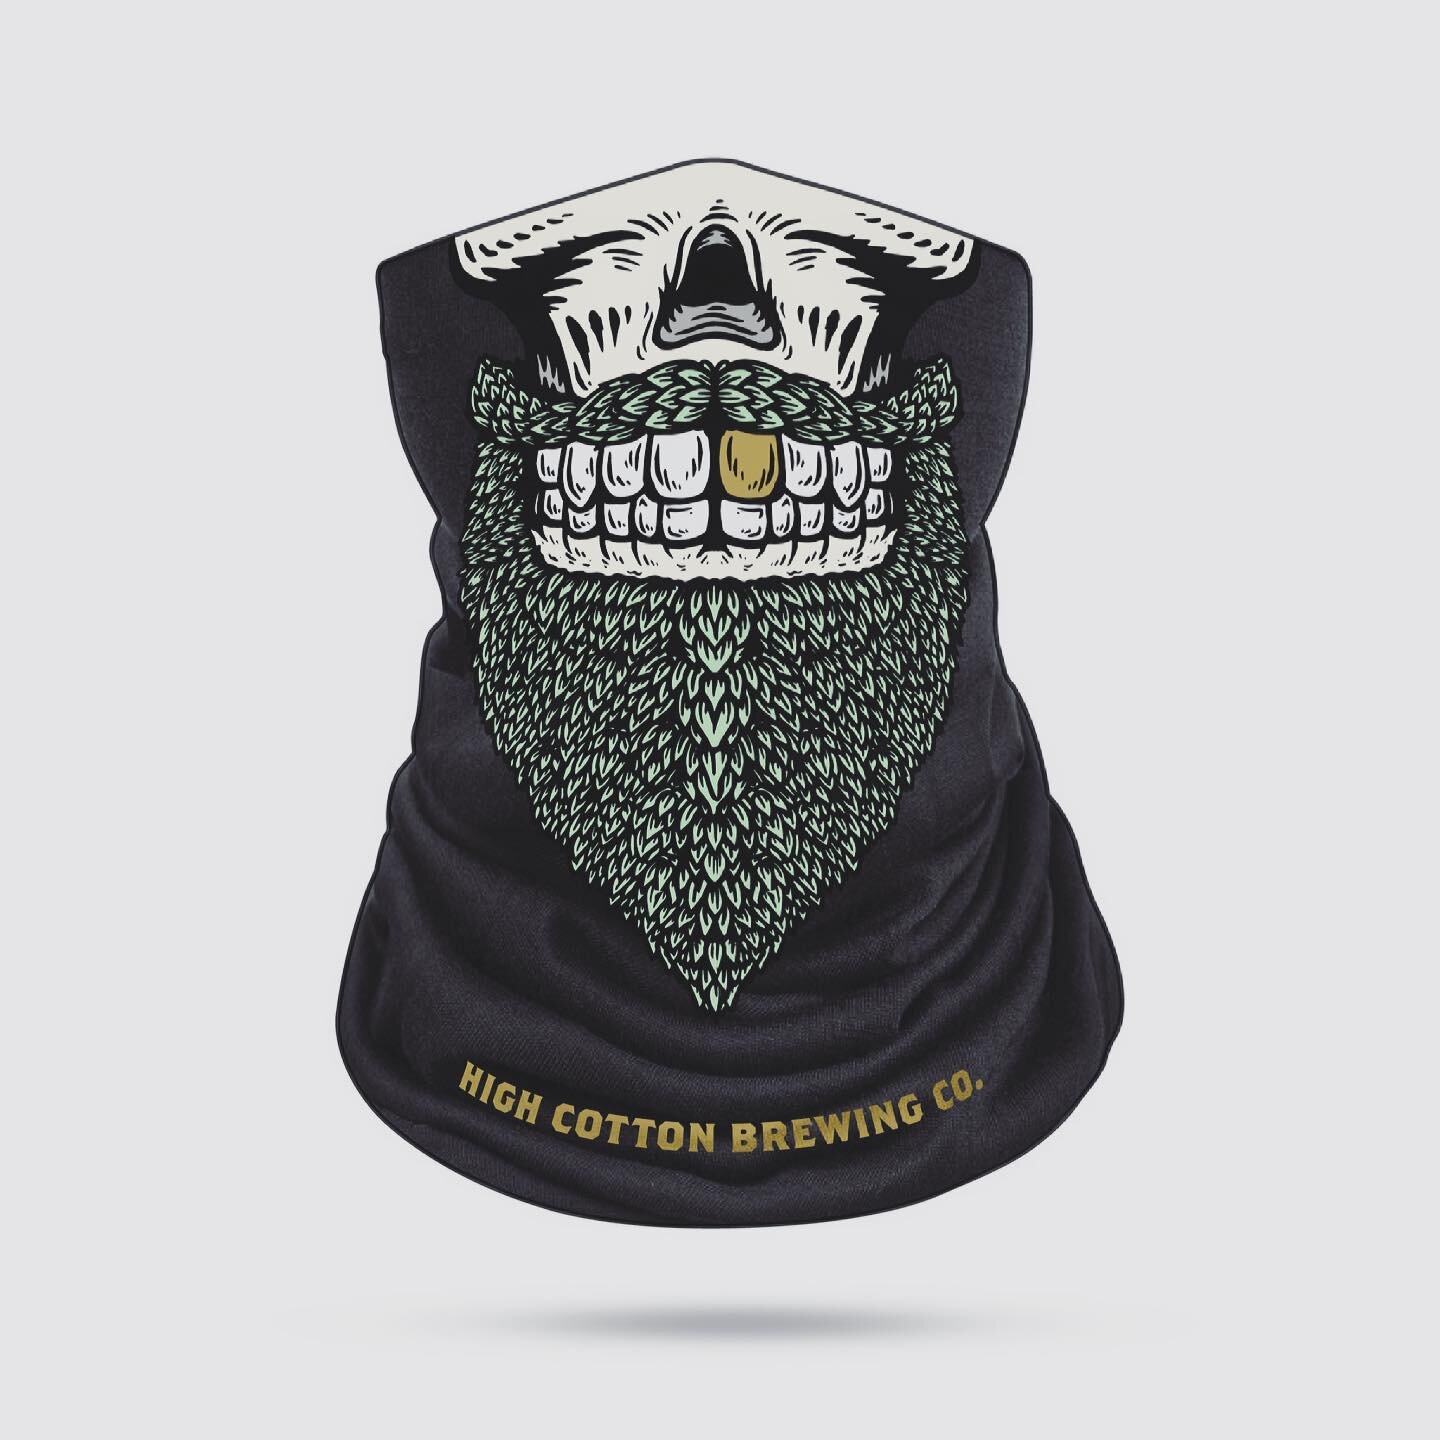 lil&rsquo; gaiter / buff illustration I had the pleasure of making for High Cotton Brewing in Memphis.
.
.
.
.
.
.
#illustration #gaiter #buff #covid #mask #brewery #branding #highcotton #memphis #graphicdesign #branding #yo